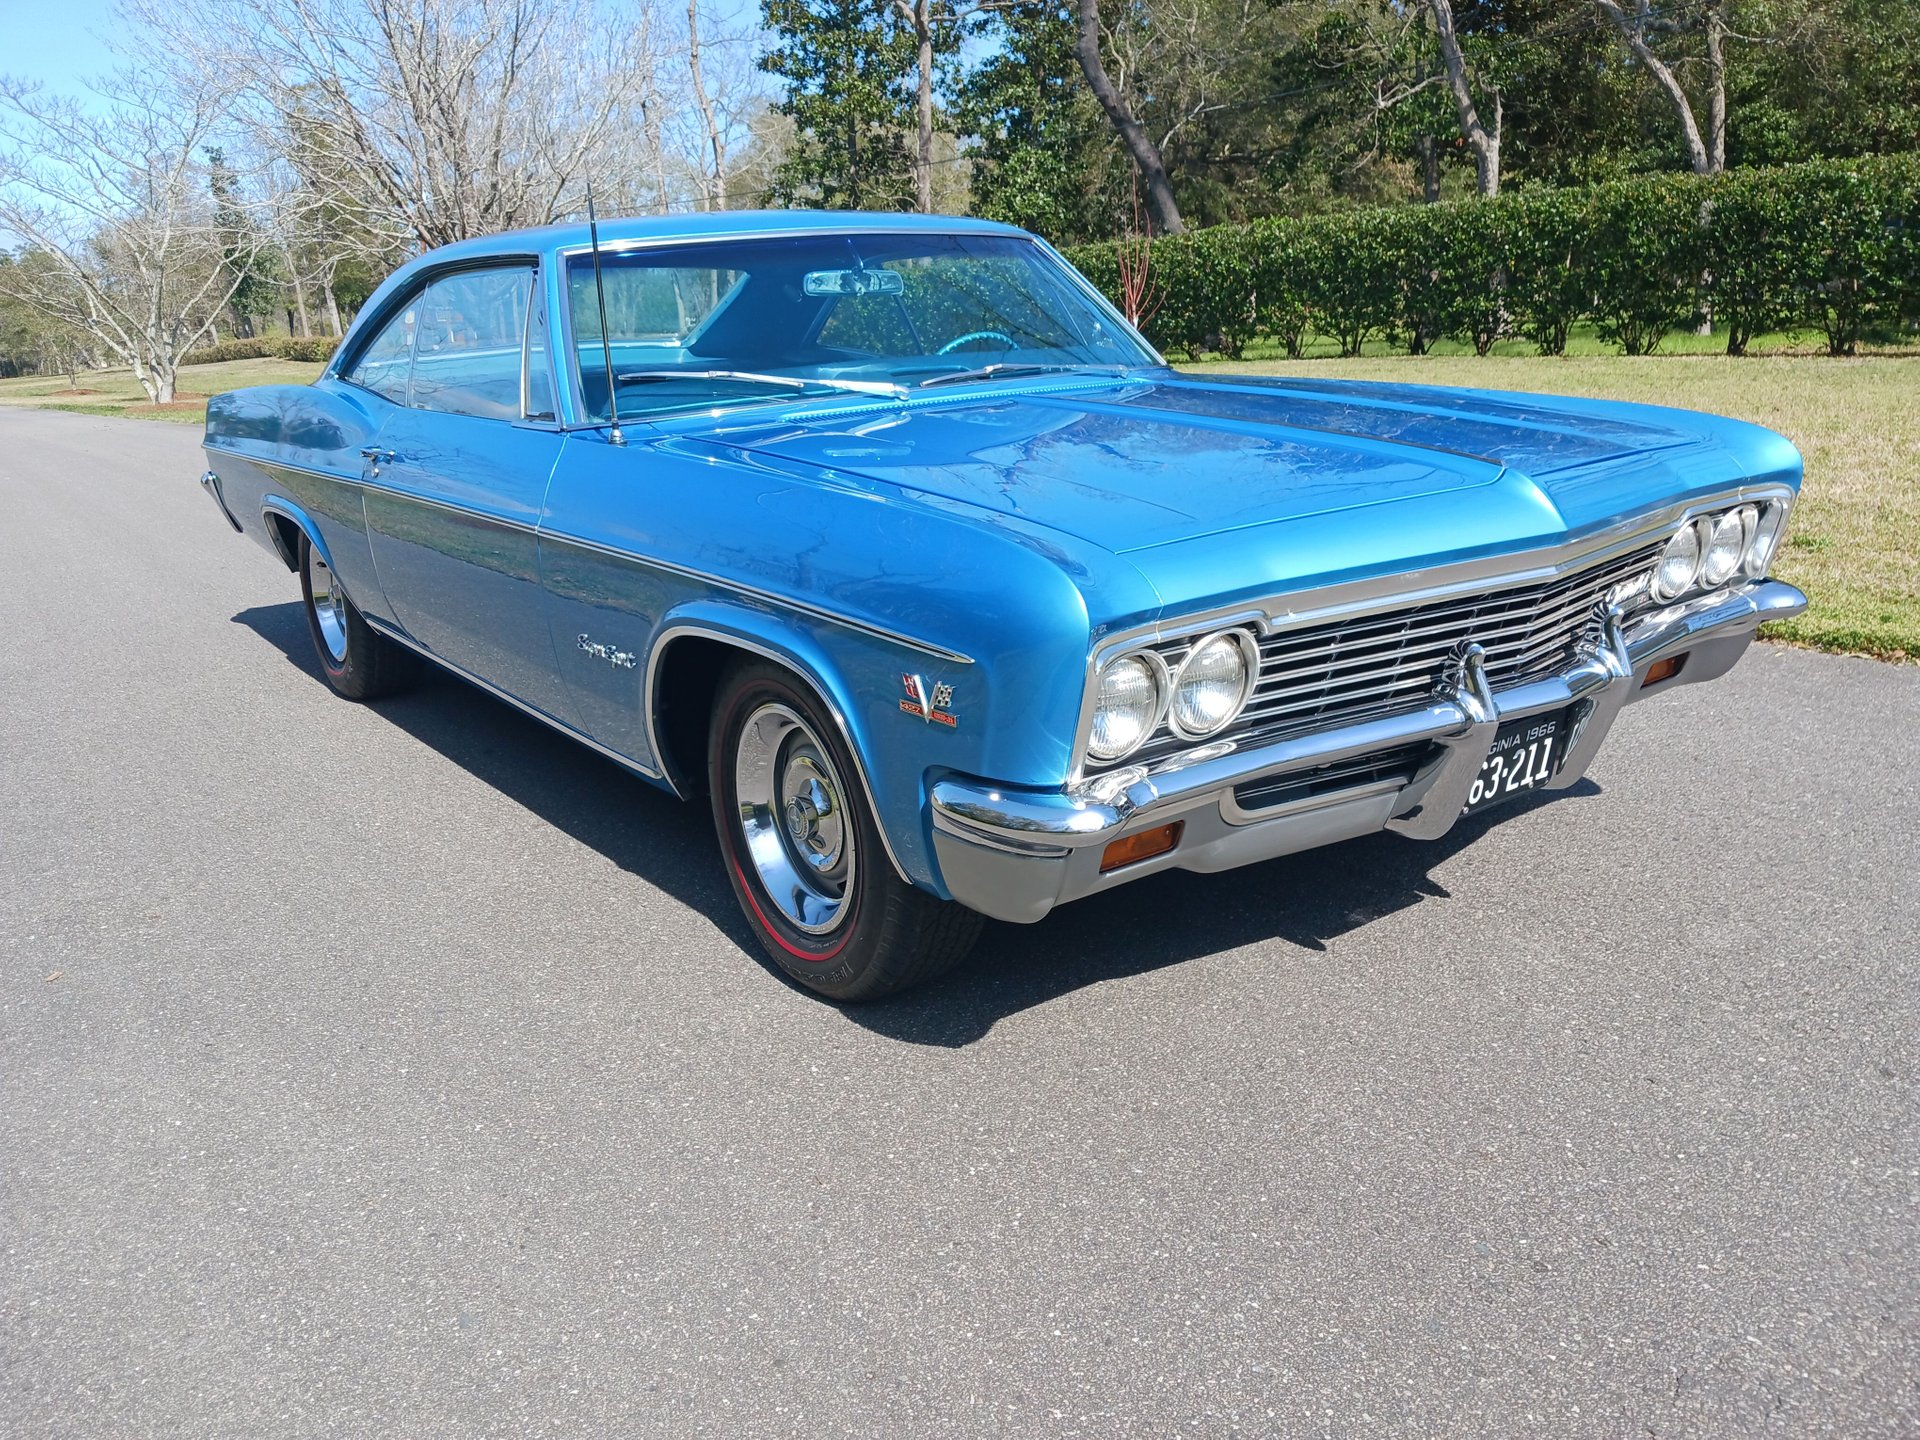 1966 Chevrolet Impala SS | Raleigh Classic Car Auctions